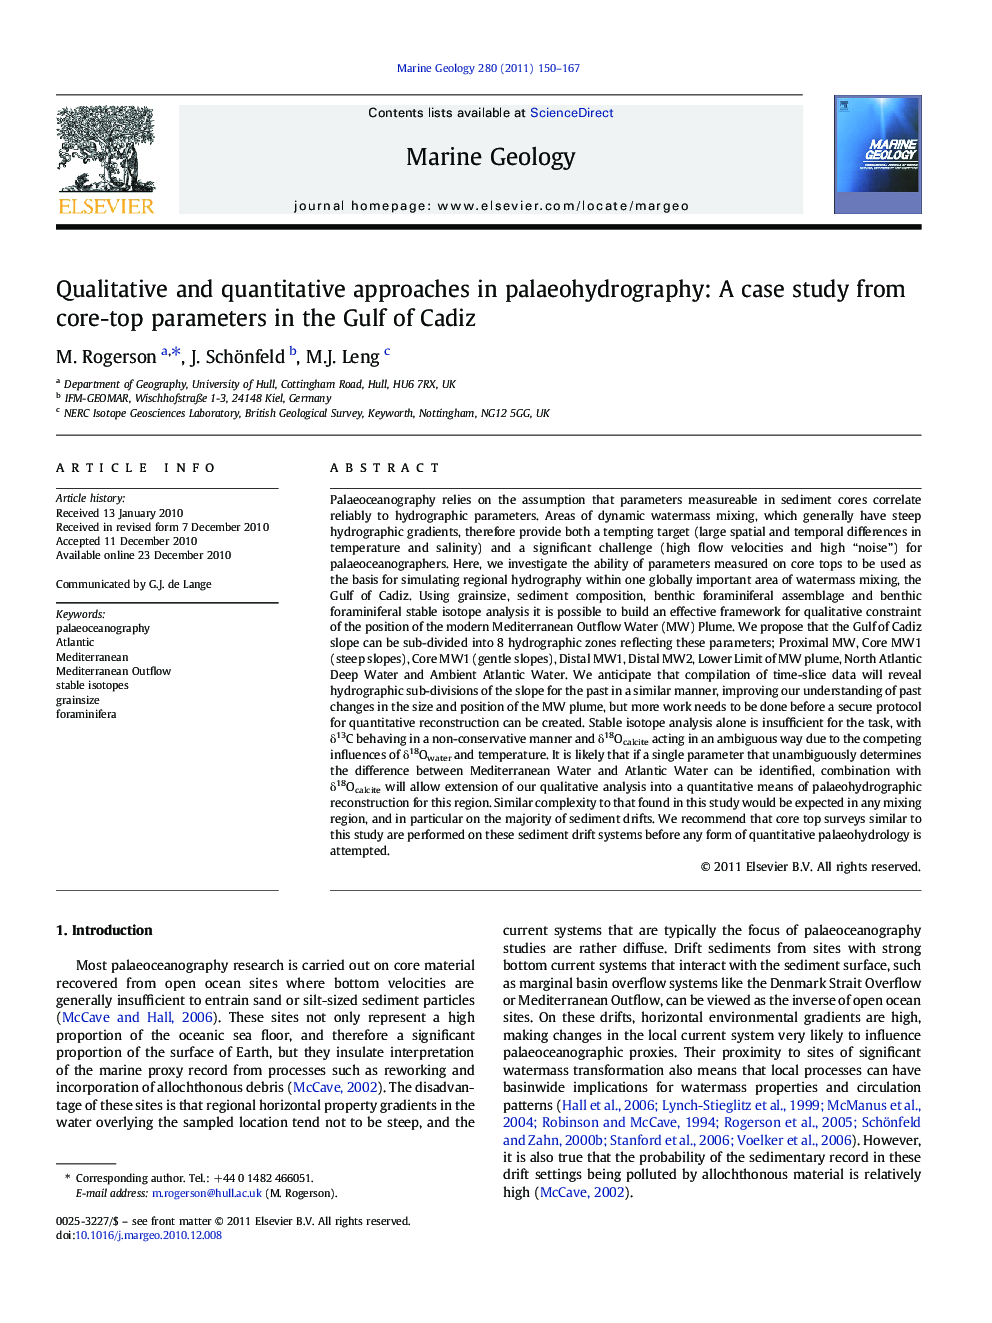 Qualitative and quantitative approaches in palaeohydrography: A case study from core-top parameters in the Gulf of Cadiz